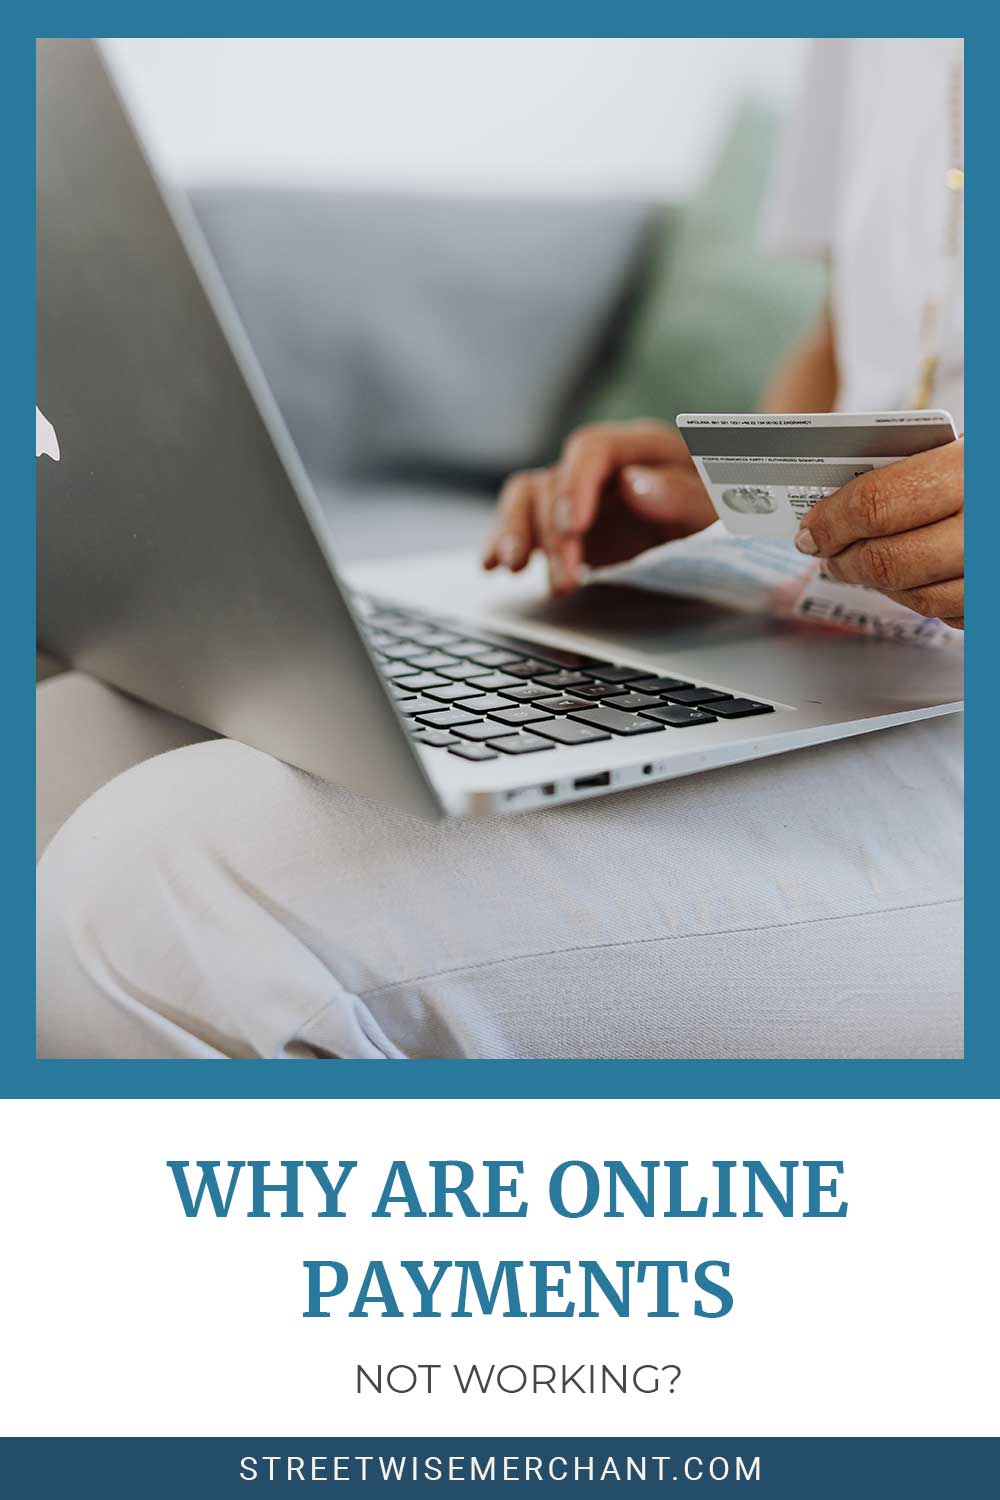 Why Are Online Payments Not Working?